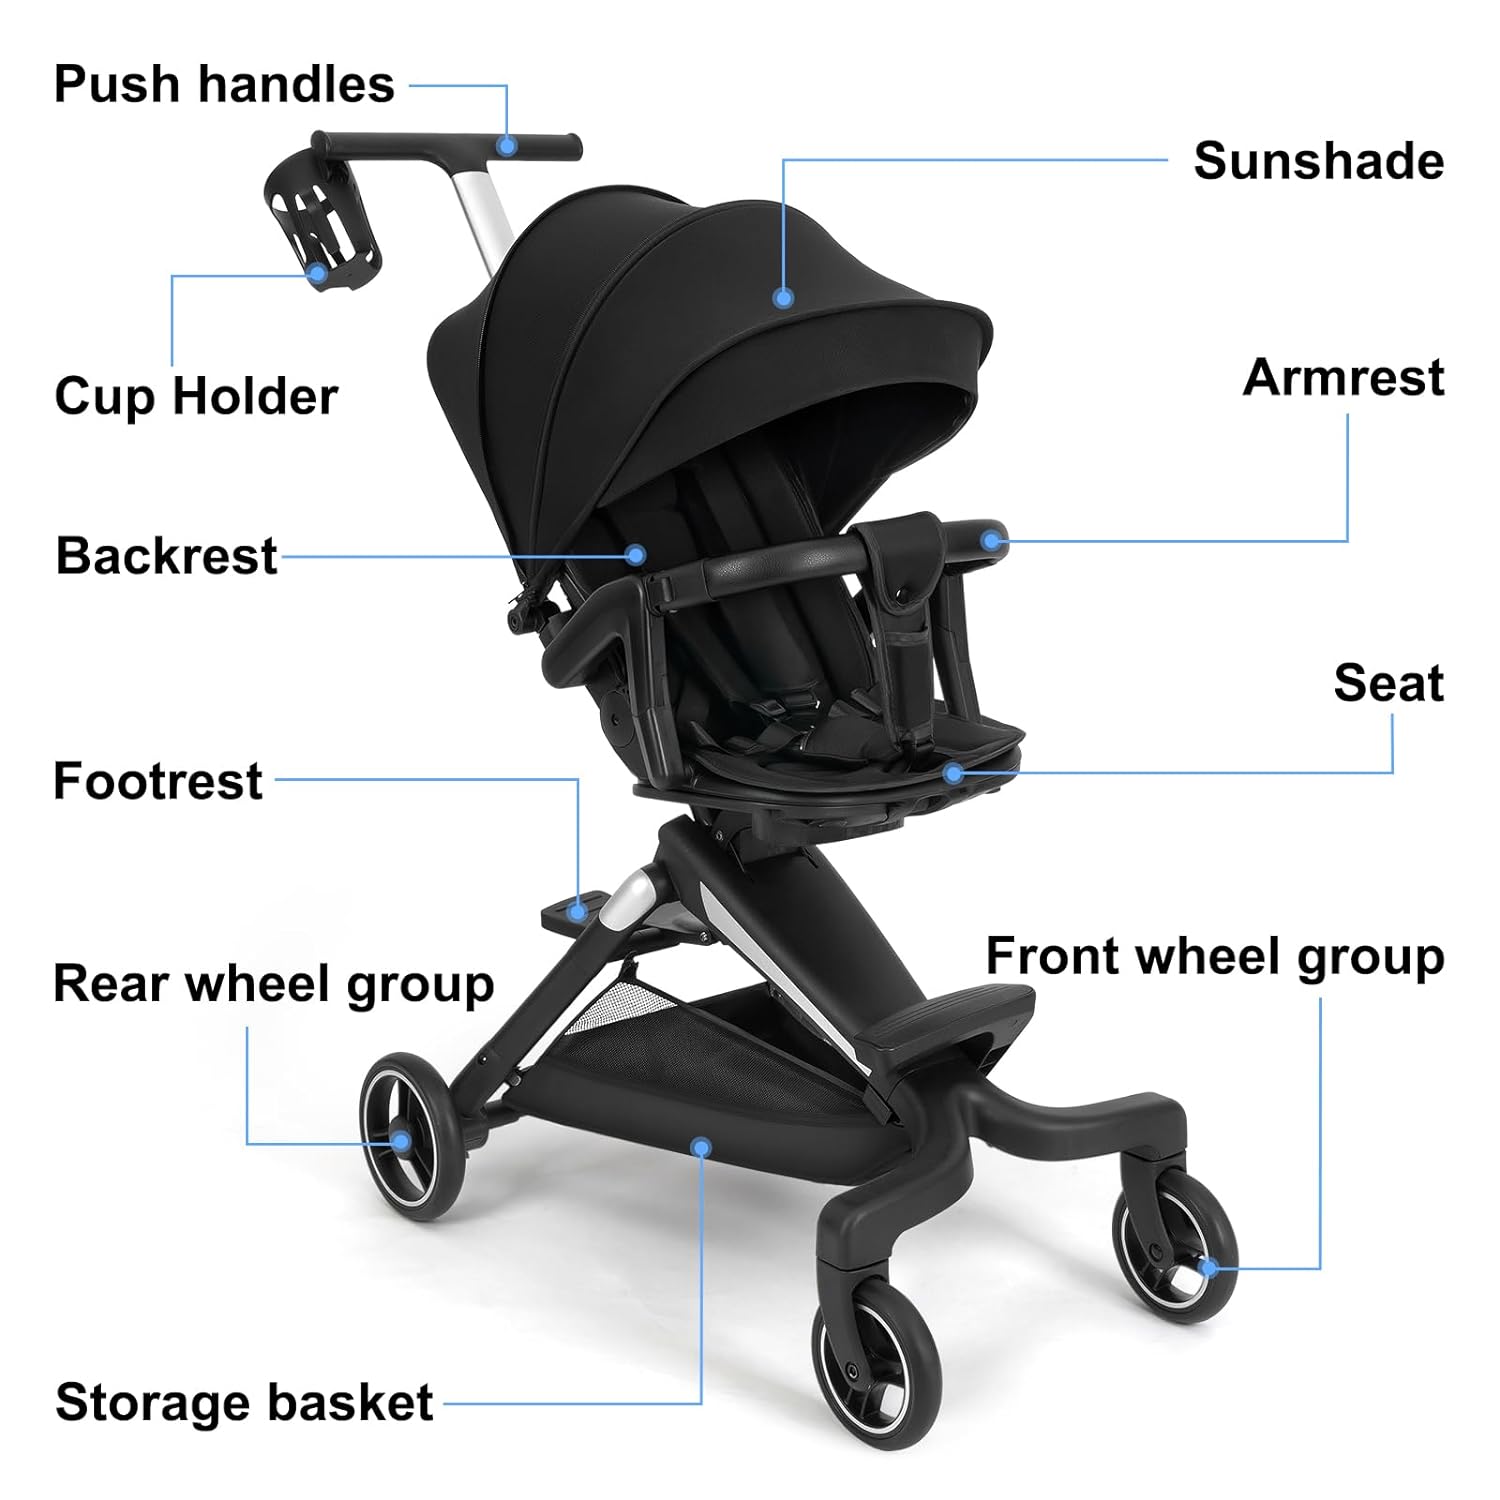 eaocrhu Convenience Stroller Lightweight Stroller Fold Compact Travel Stroller Multiposition Recline, One-Hand Fold Baby Stroller, Cup Holder, Raincover Included, Black